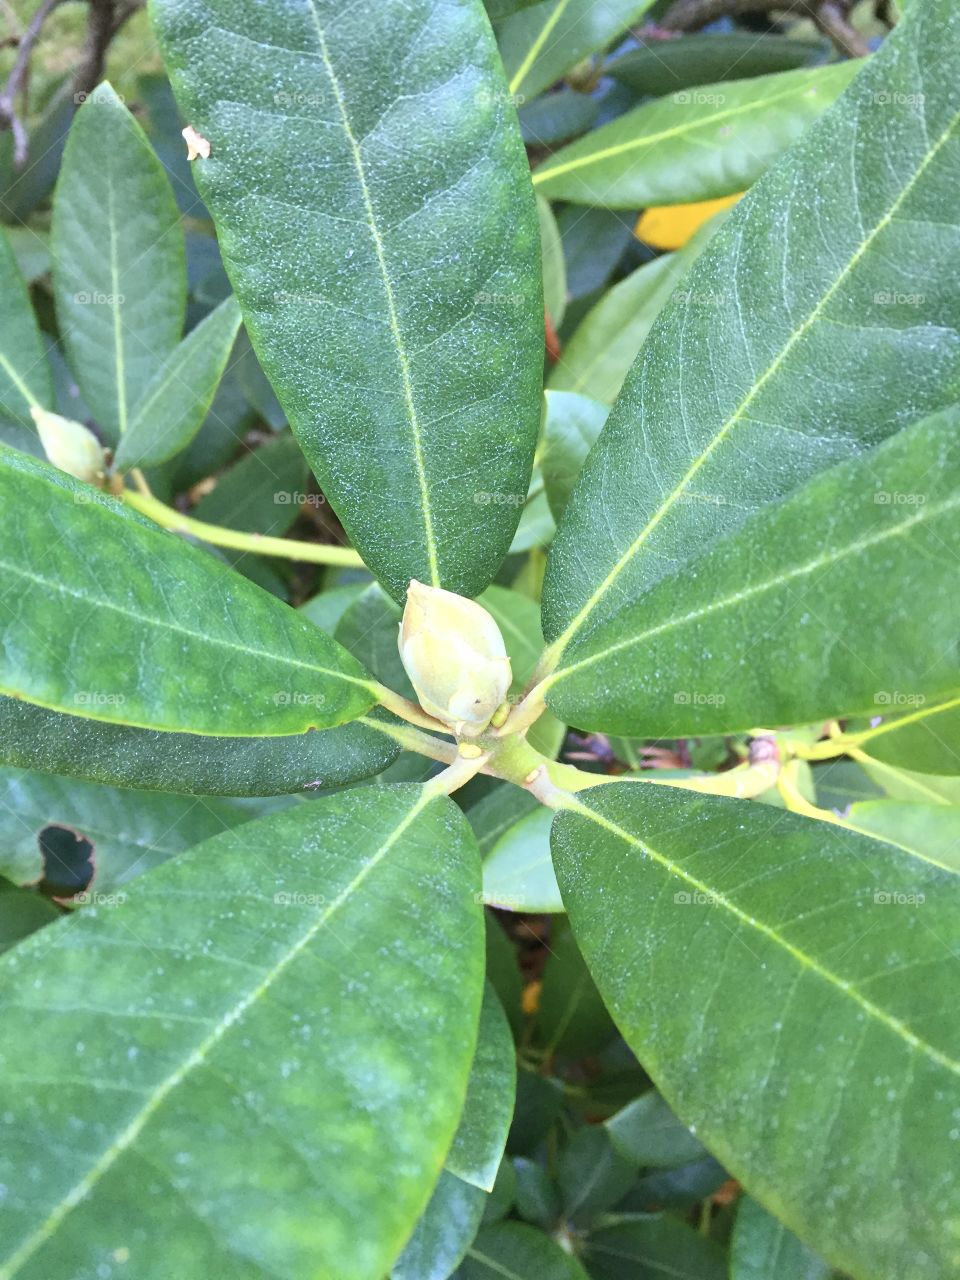 Flowerbuds on my Rhododendron for next summer 